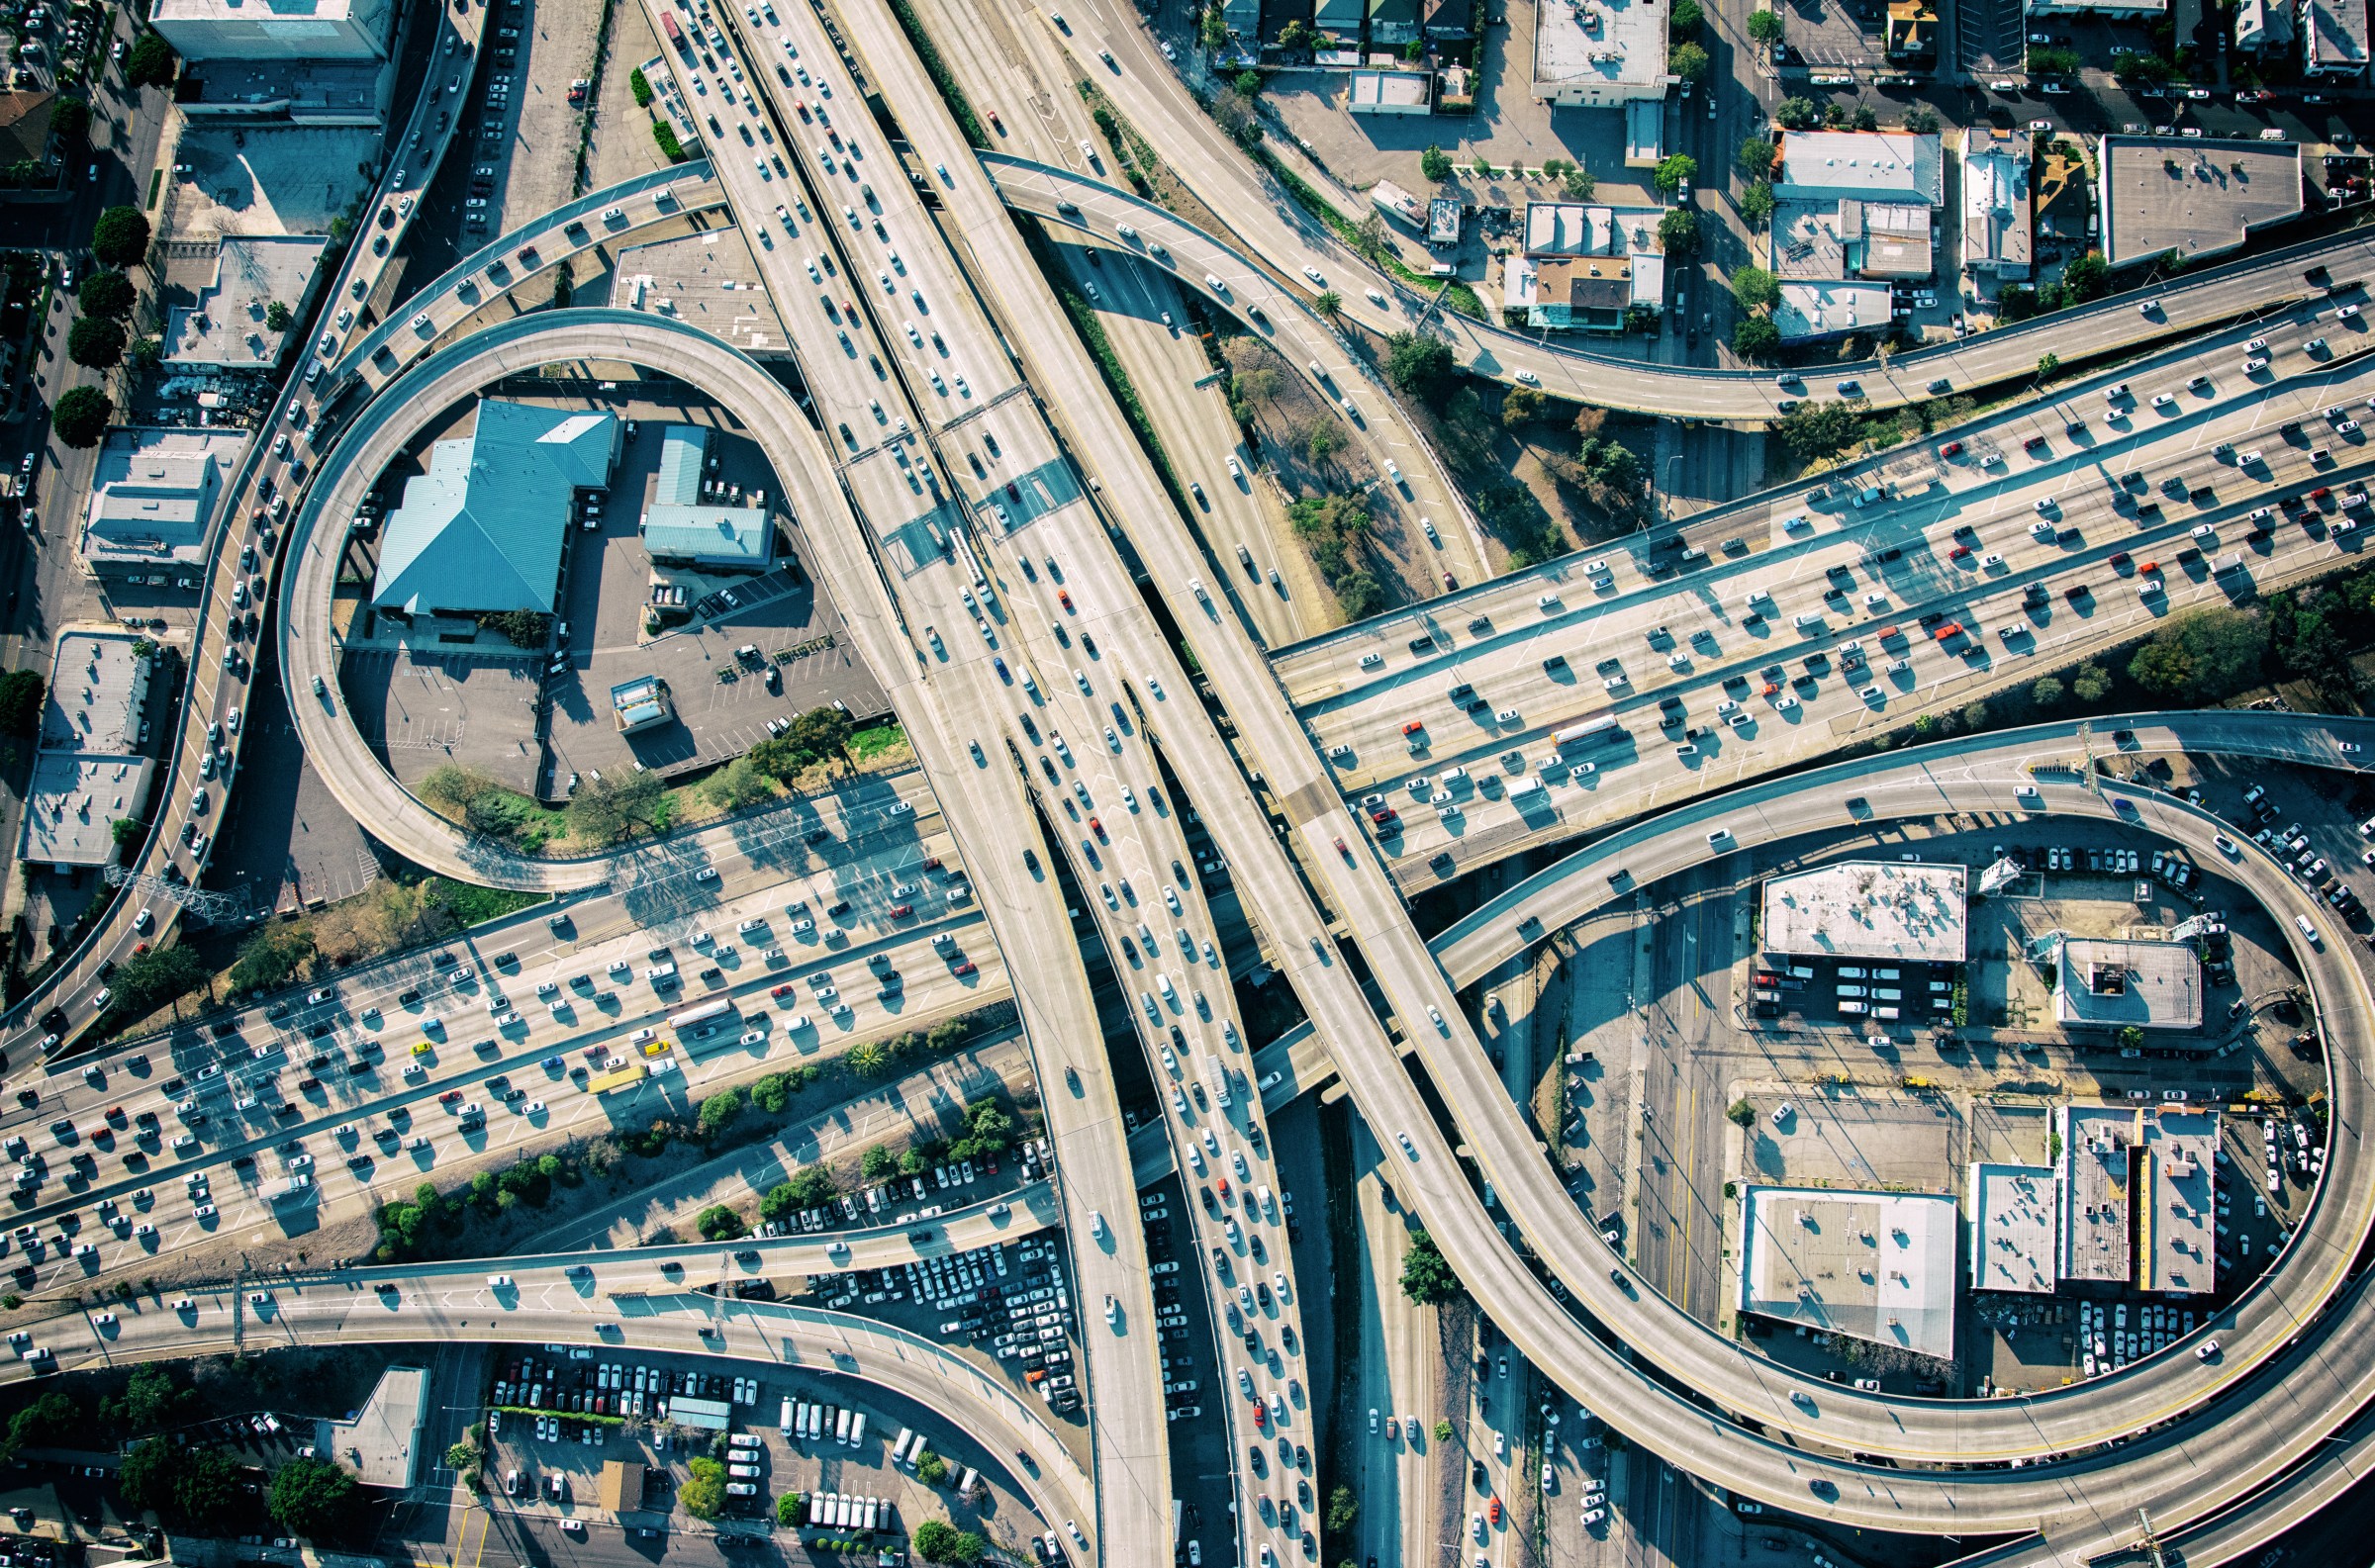 Do bigger highways actually help reduce traffic?